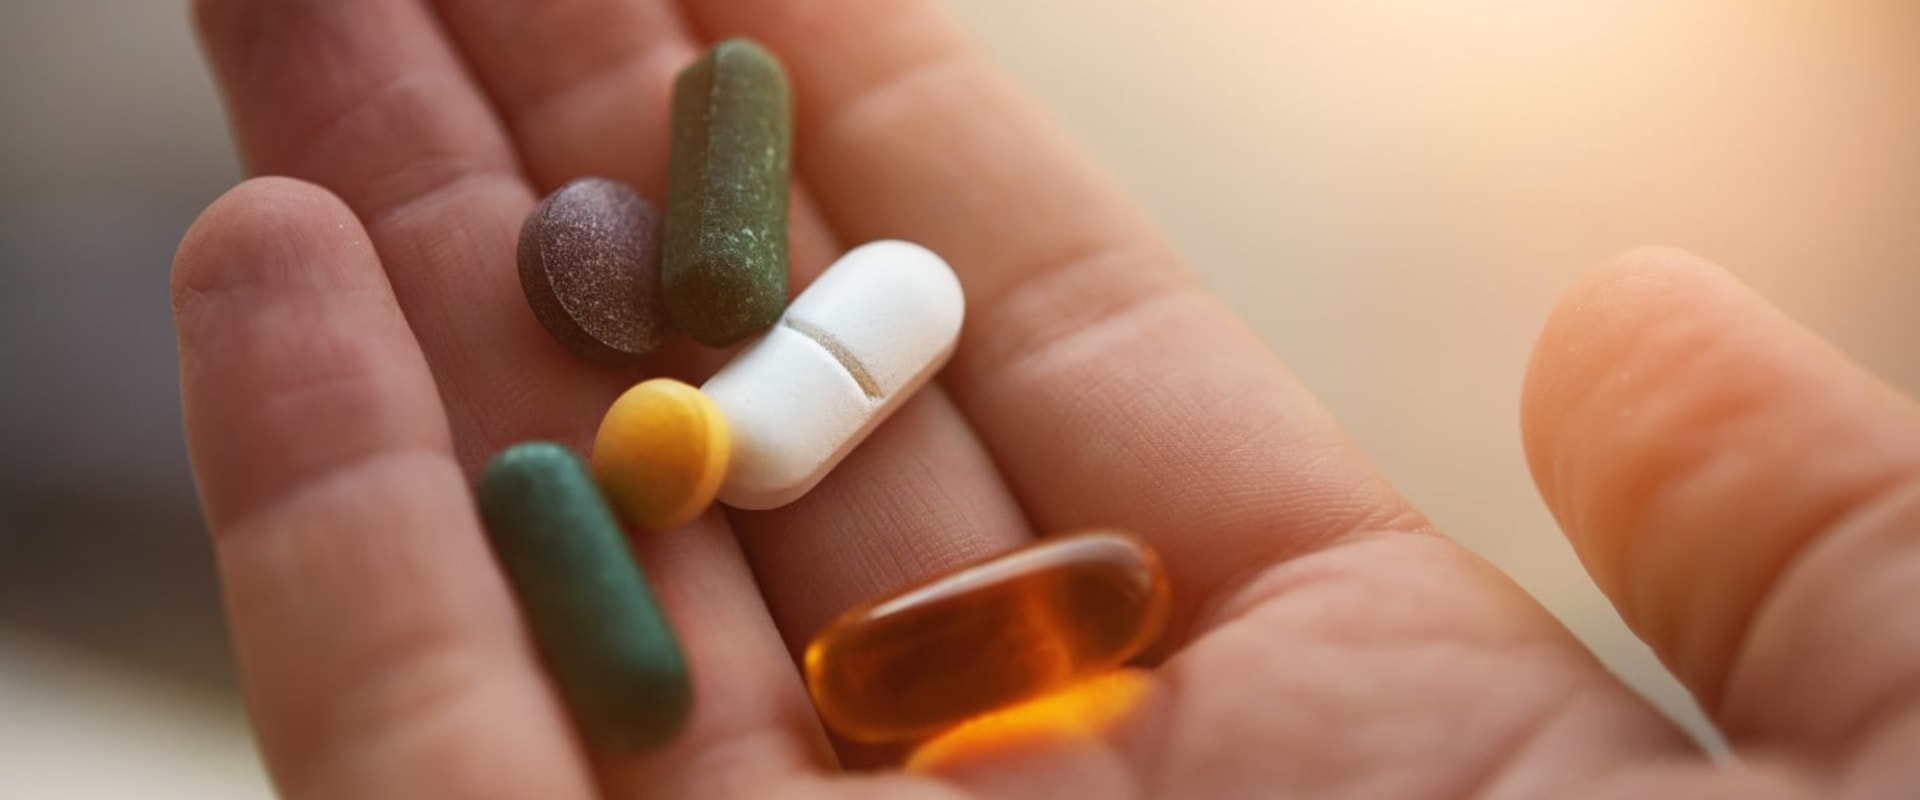 How do you know if a supplement is reliable?